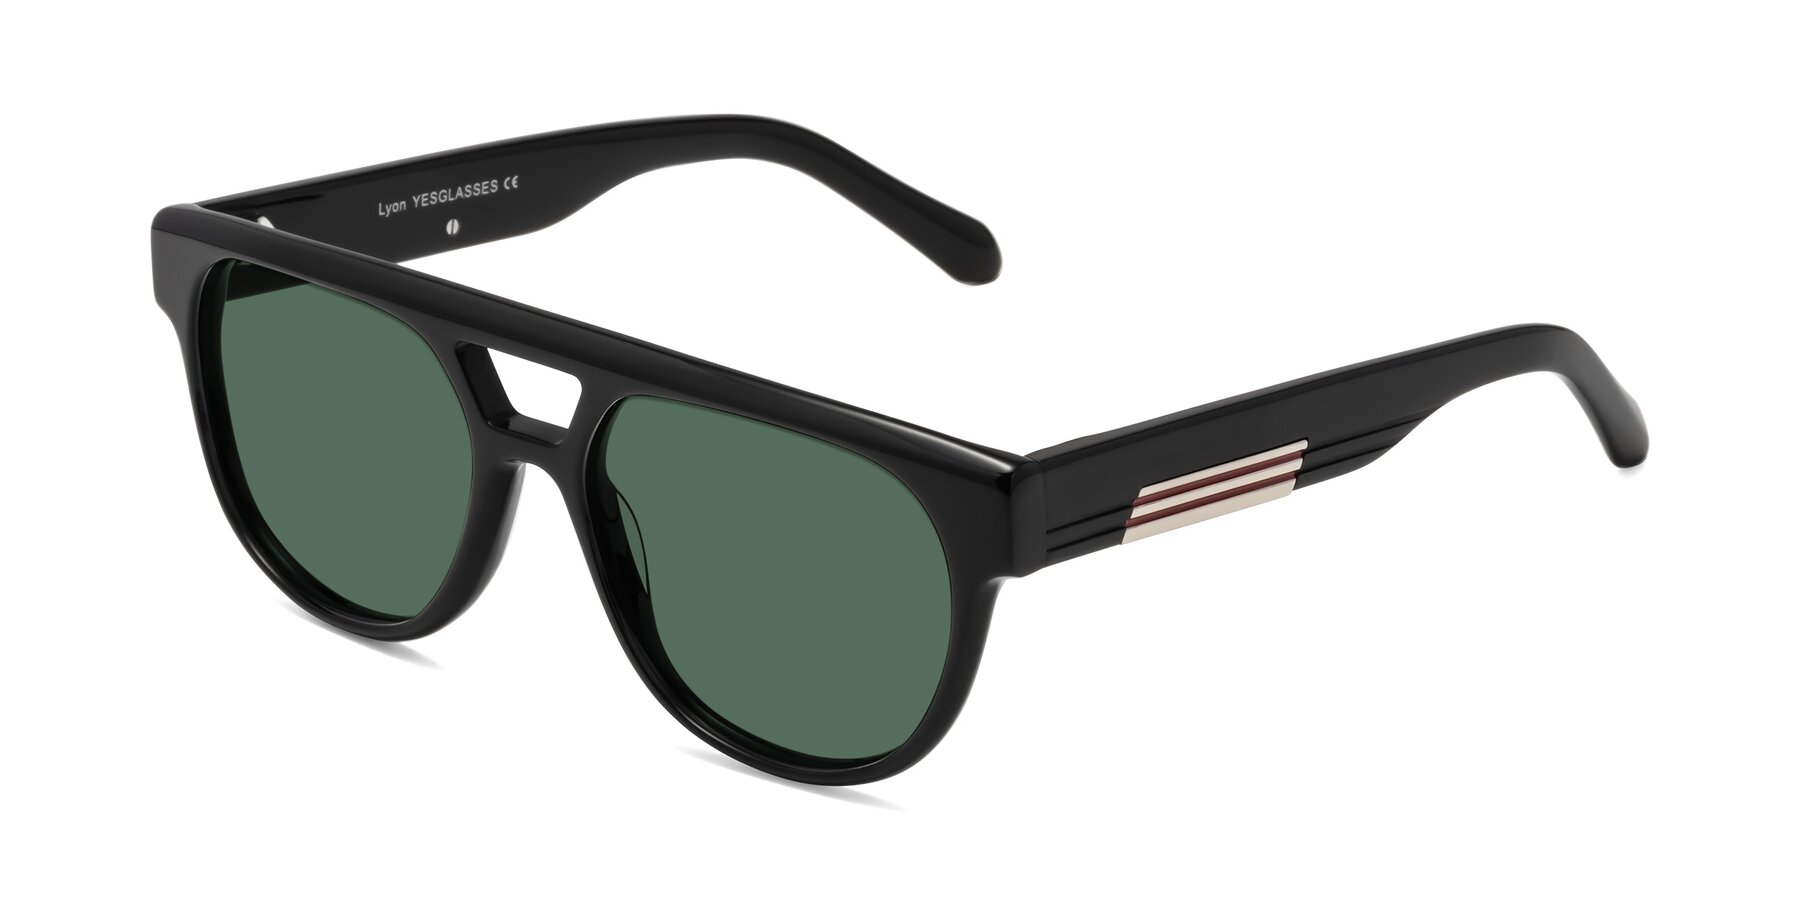 Angle of Lyon in Black with Green Polarized Lenses